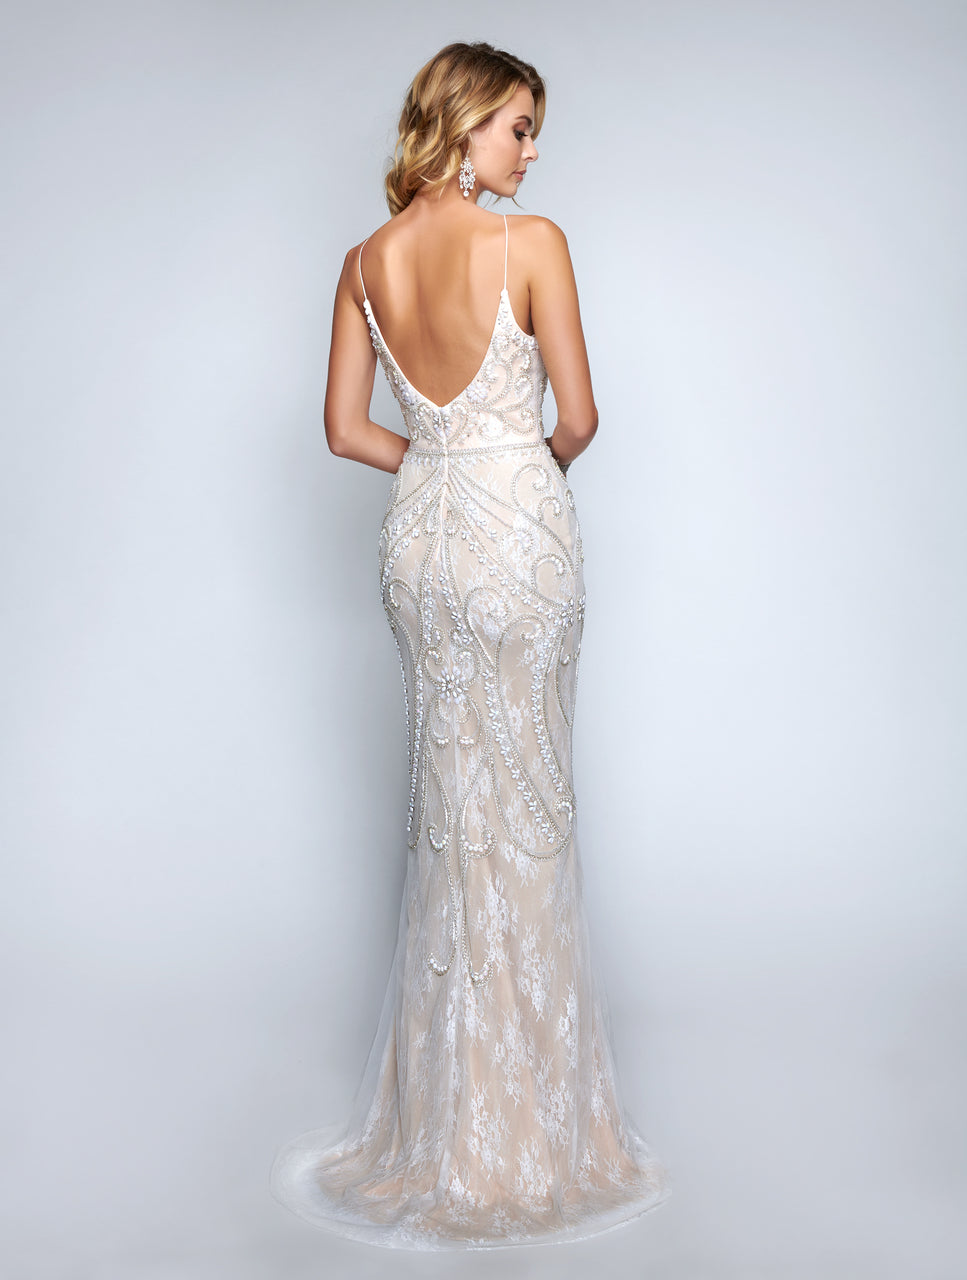 Nina Canacci 8170  Prom Dress Pageant Gown & Destination wedding dress.  Iridescent Beading, Pearl & Crystal embellished bodice with a tulle overlay on Delicate lace. V Neckline with spaghetti straps. embellished mermaid evening gown with spaghetti straps   Available Colors: Ivory/nude  Available Sizes: 10, 12